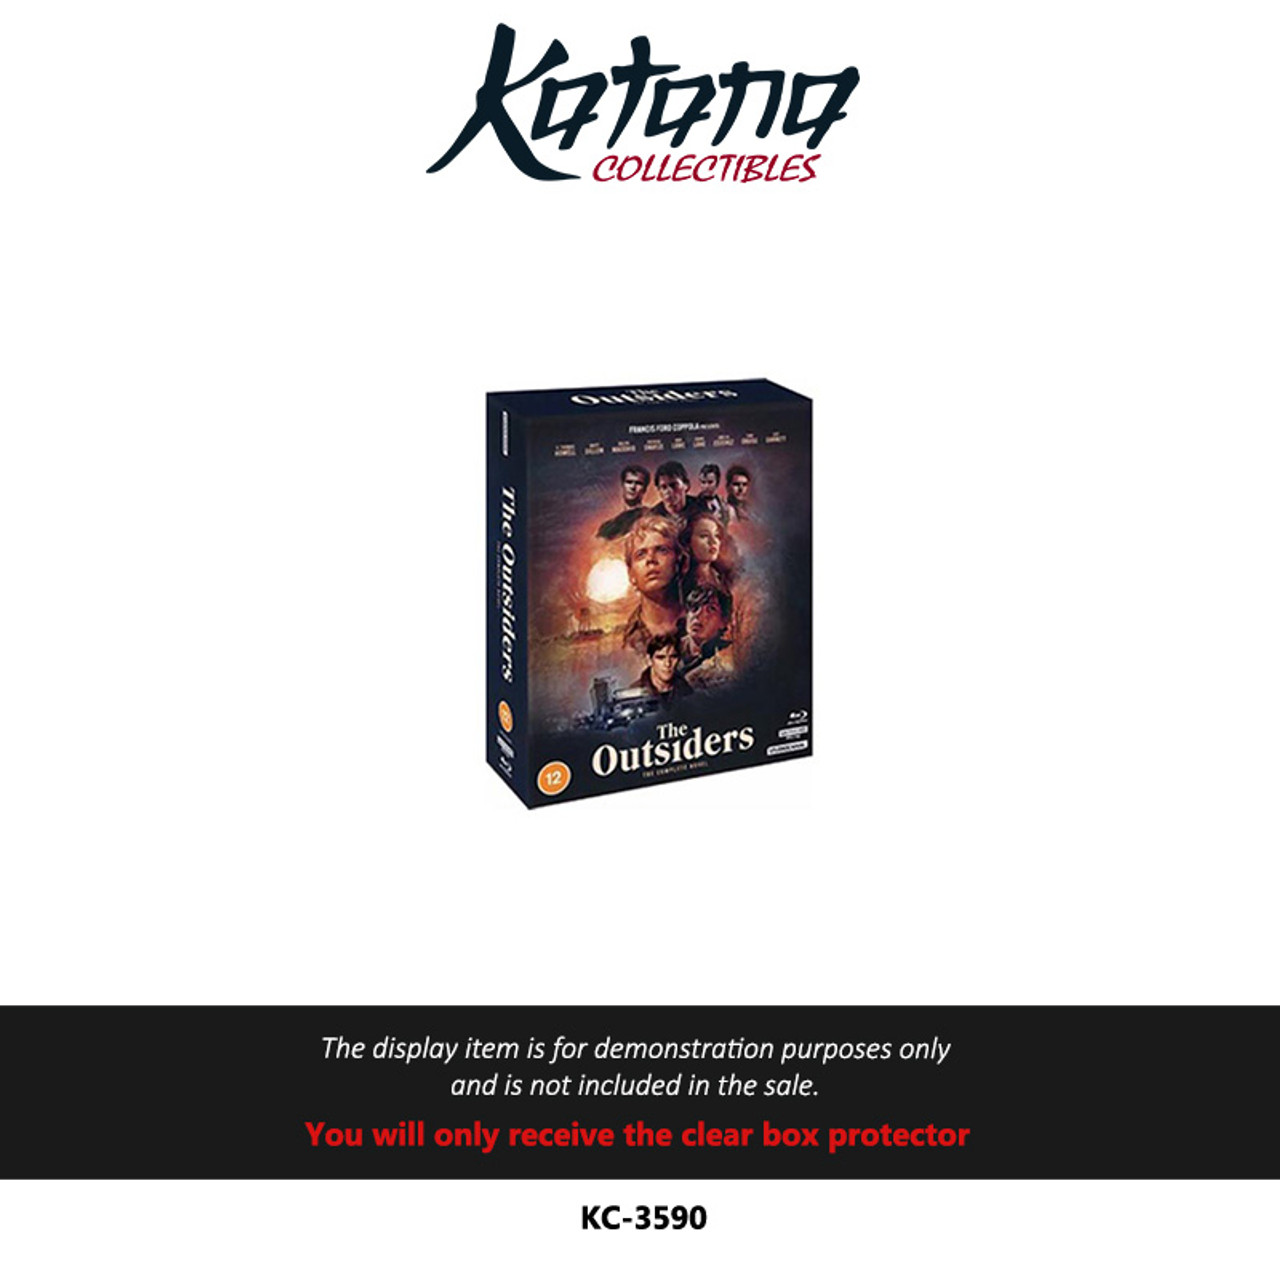 Katana Collectibles Protector For The Outsiders - The complete novel 4K UK edition